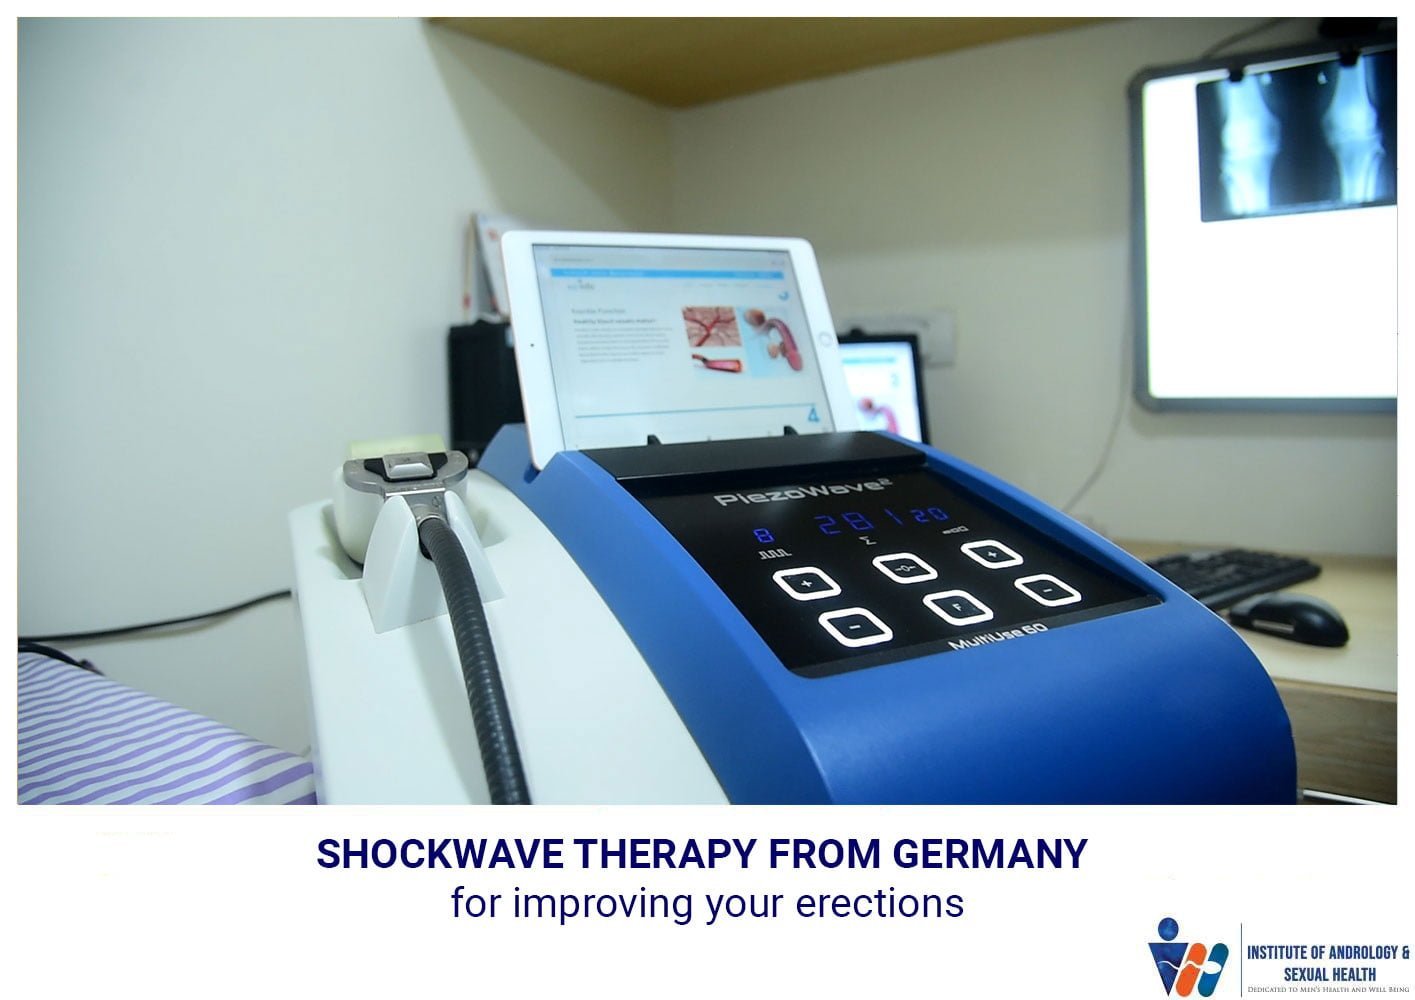 Shockwave Therapy From Germany for improving your Erections